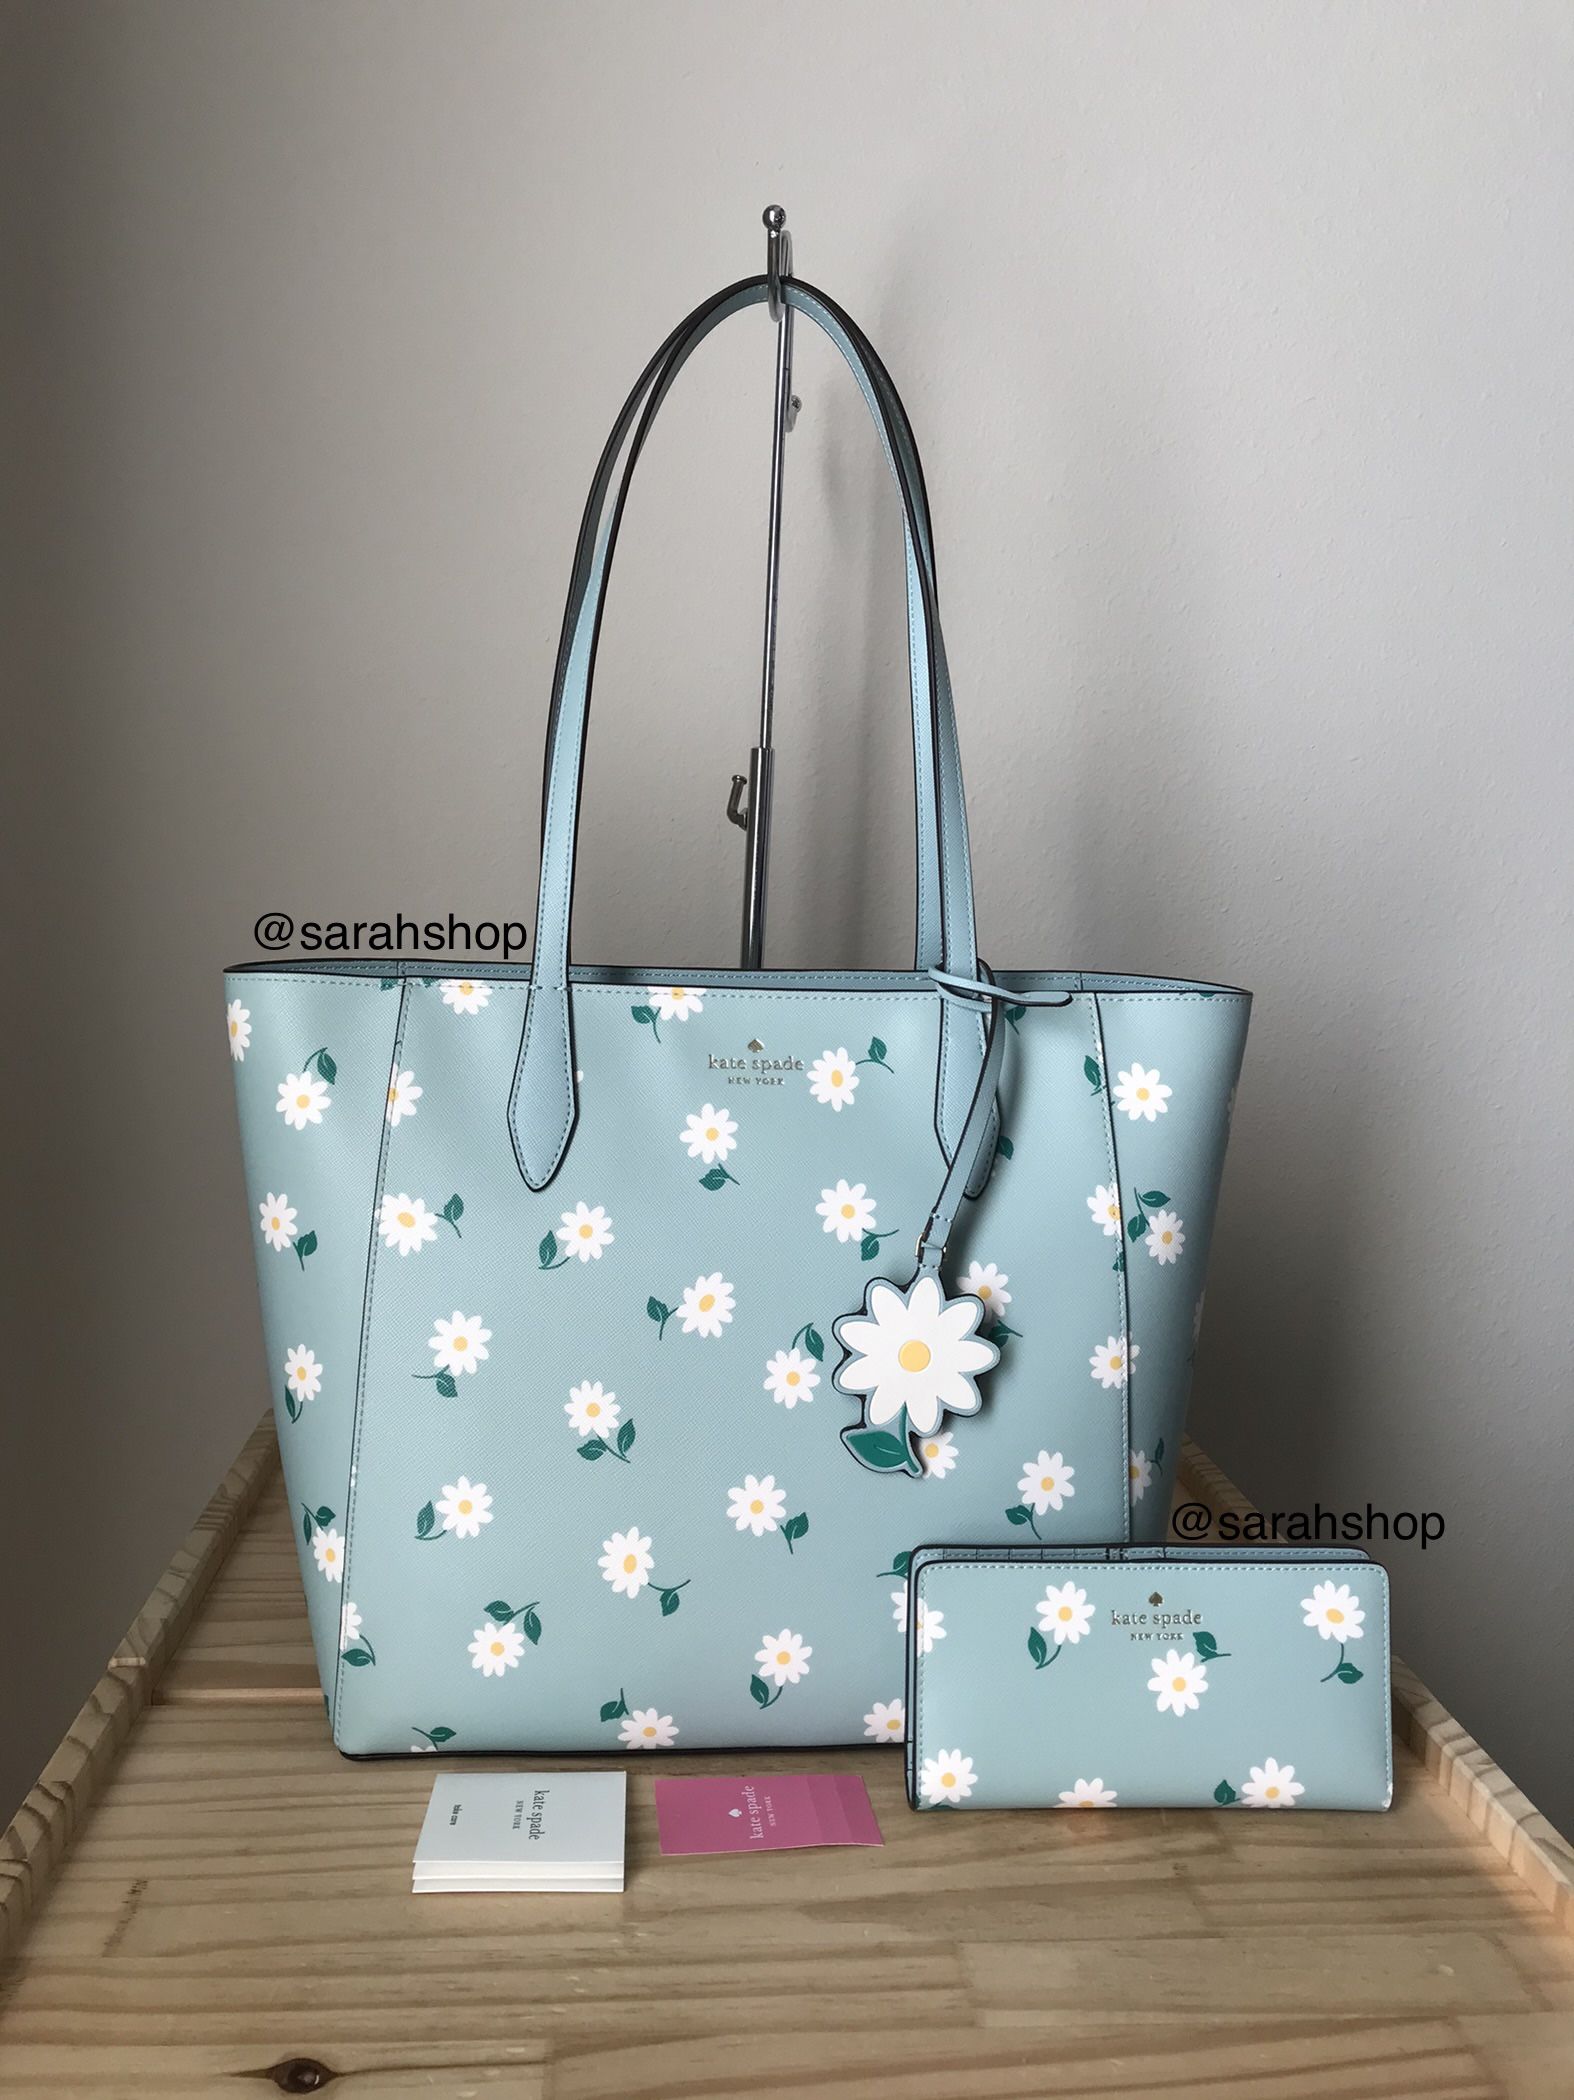 Kate Spade Set for Sale in Palm Shores, FL - OfferUp